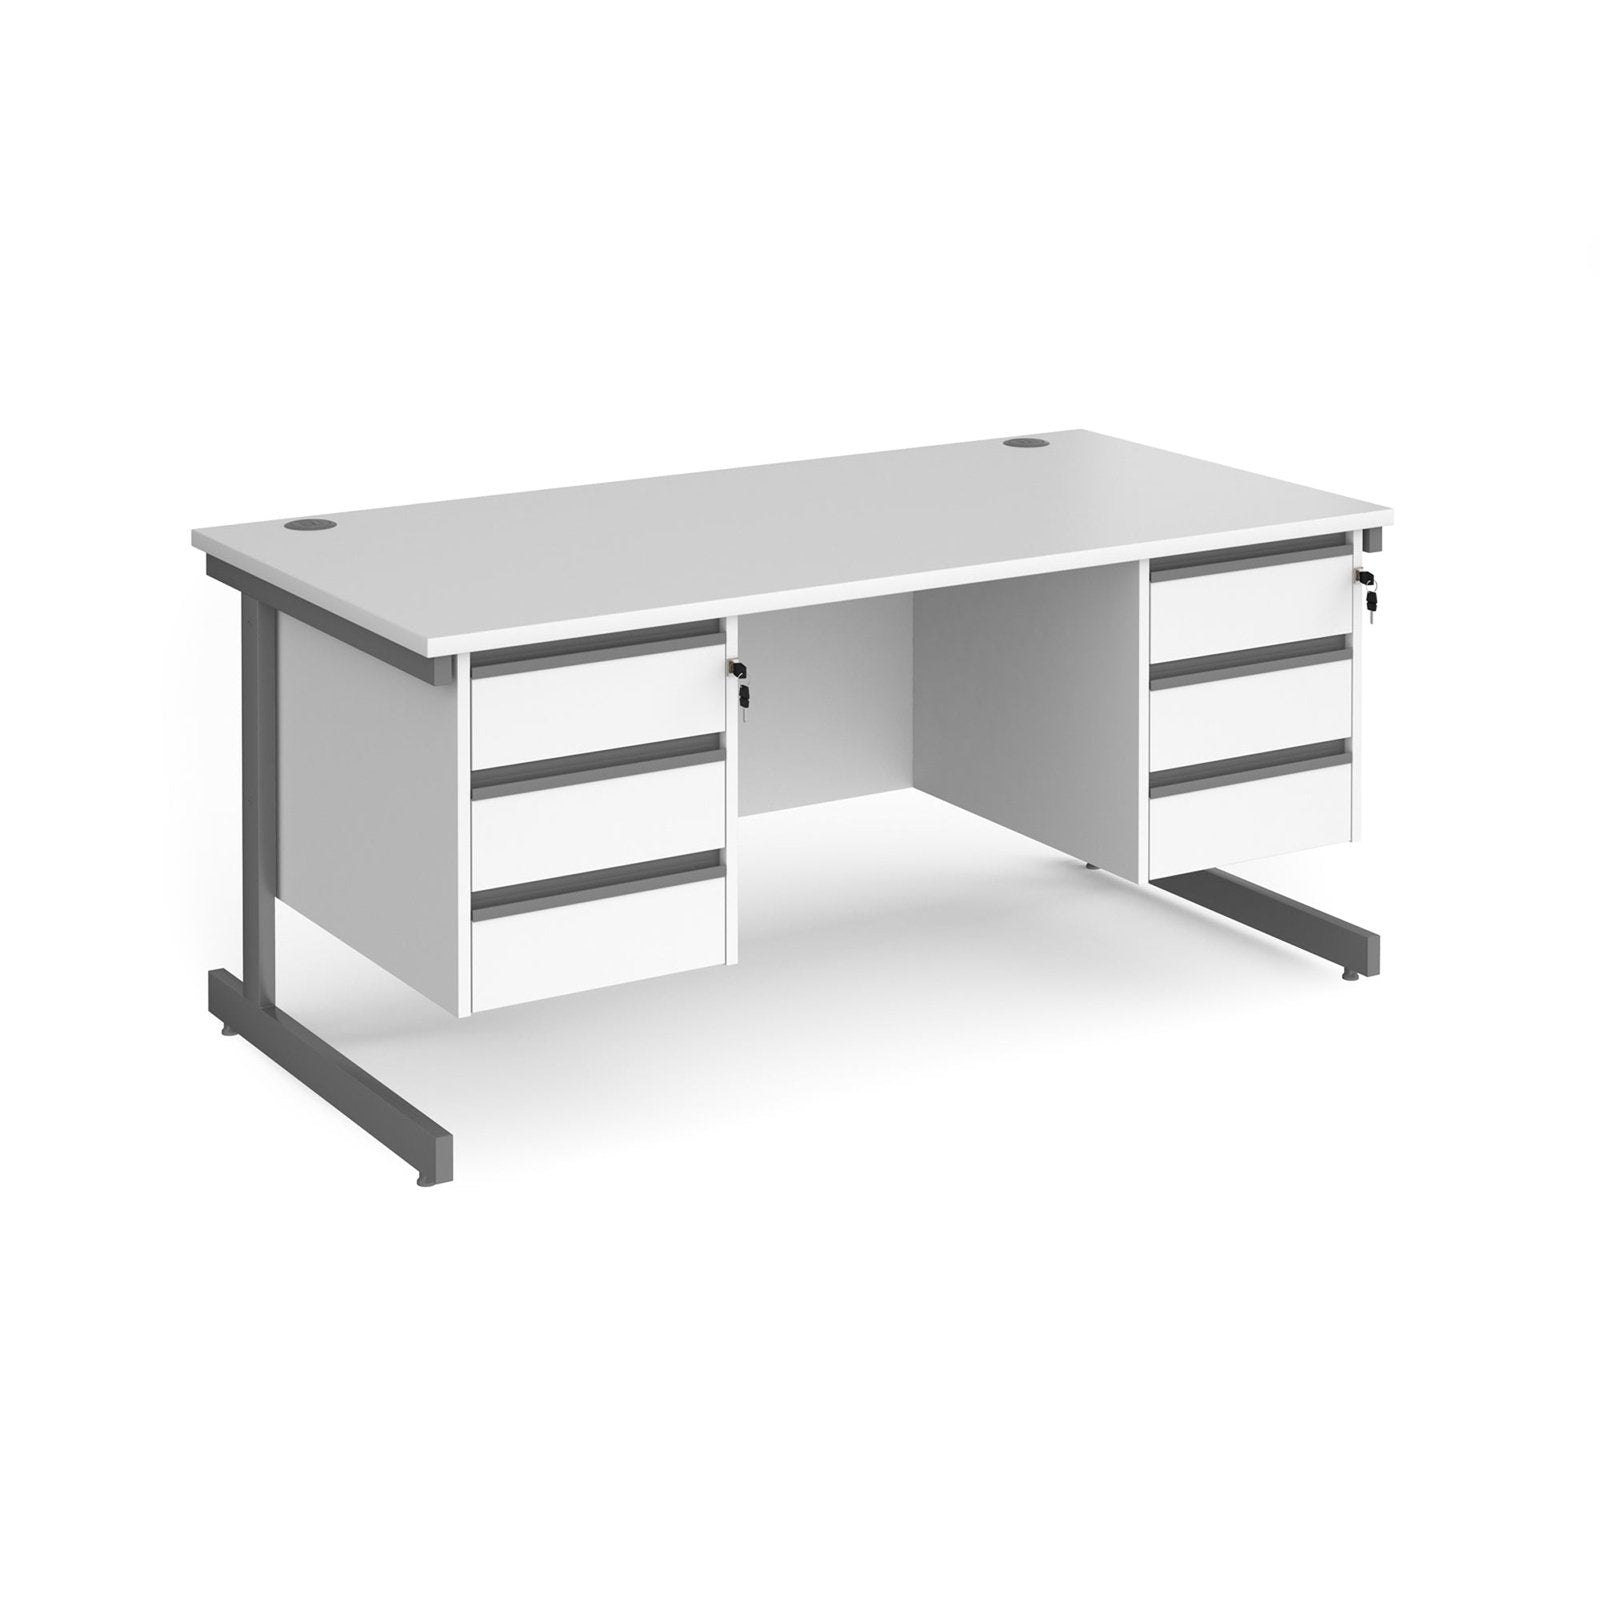 Contract 25 straight desk with 3 drawer pedestals and cantilever leg - Office Products Online